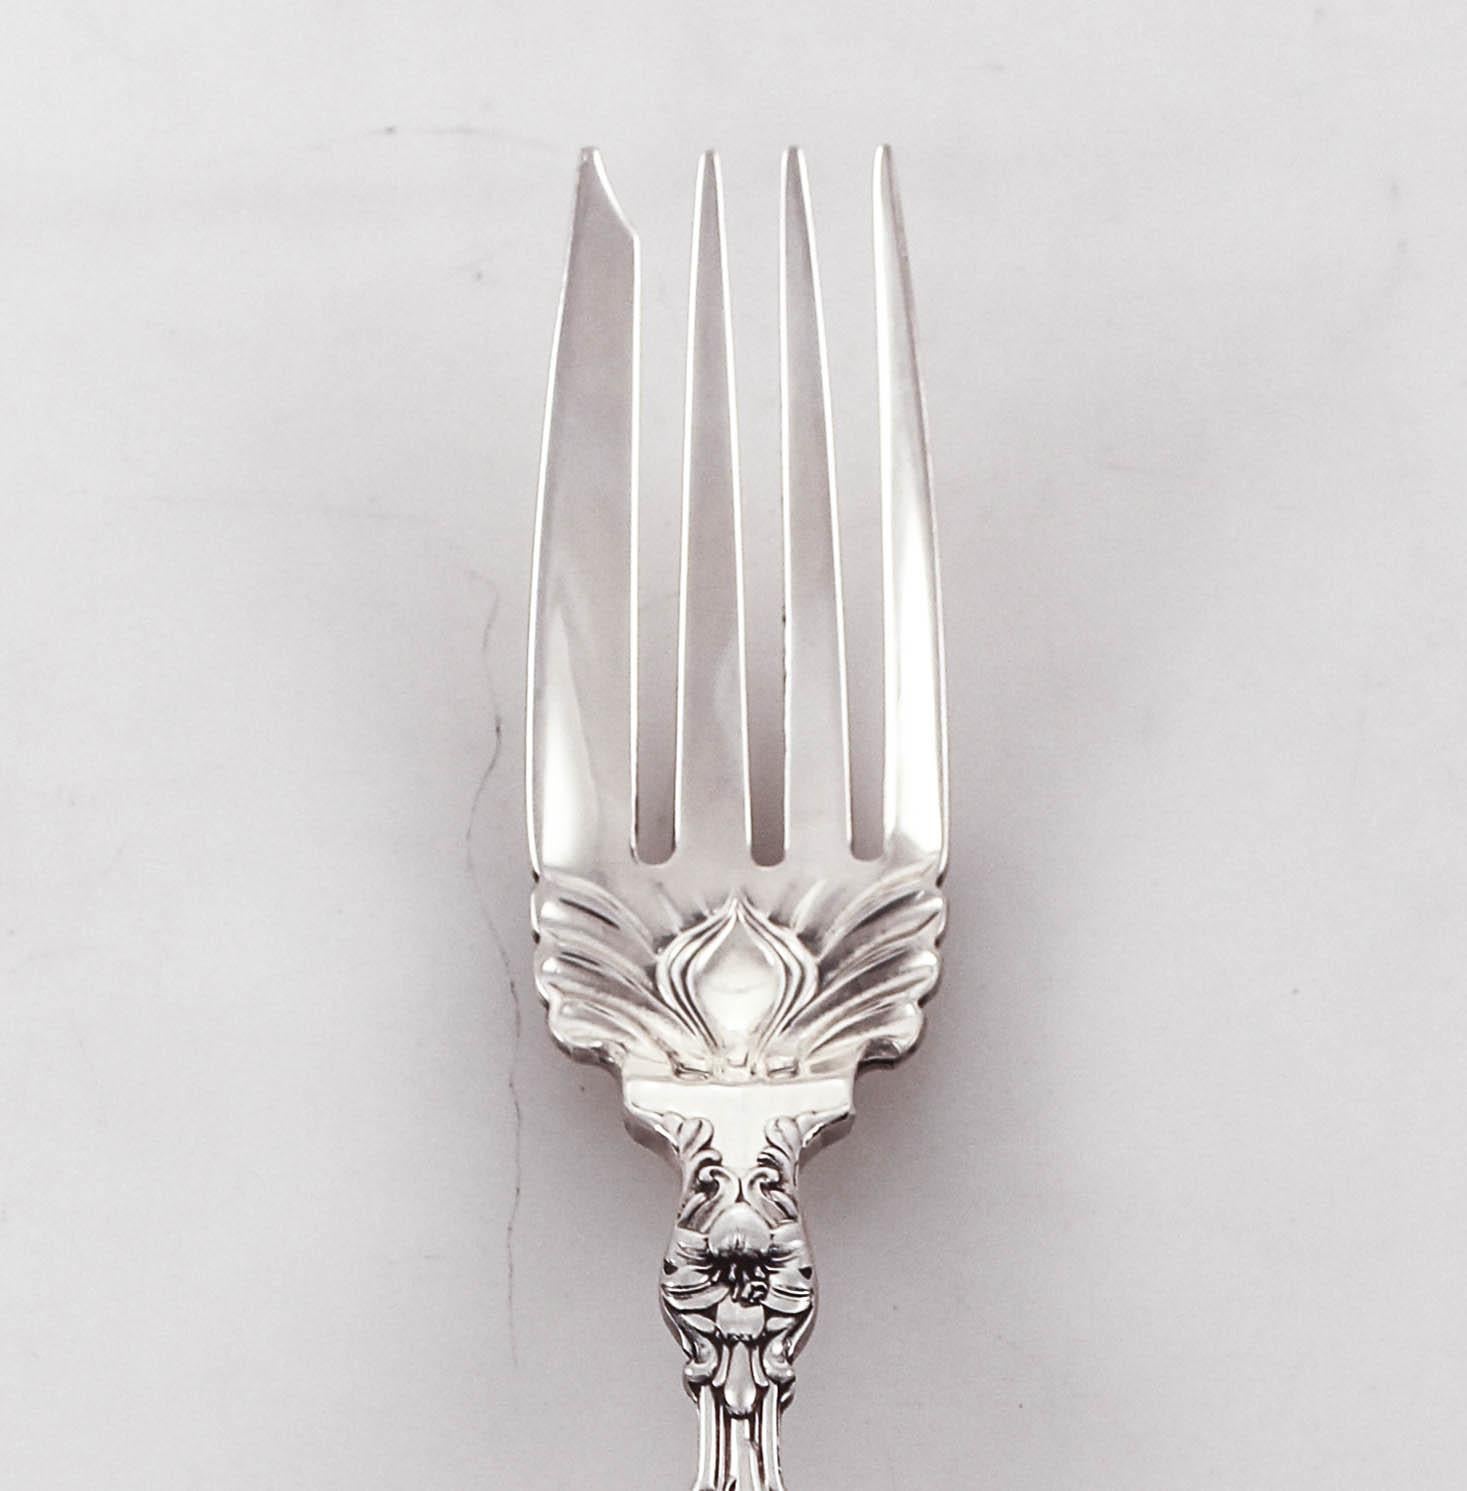 We are thrilled to offer this sterling silver serving fork by Whiting Manufacturing in the famous “Lily” pattern. One of Whiting’s most iconic patterns, it is very beautiful and sought after.
The design of blown-out flowers is classic Art Nouveau.